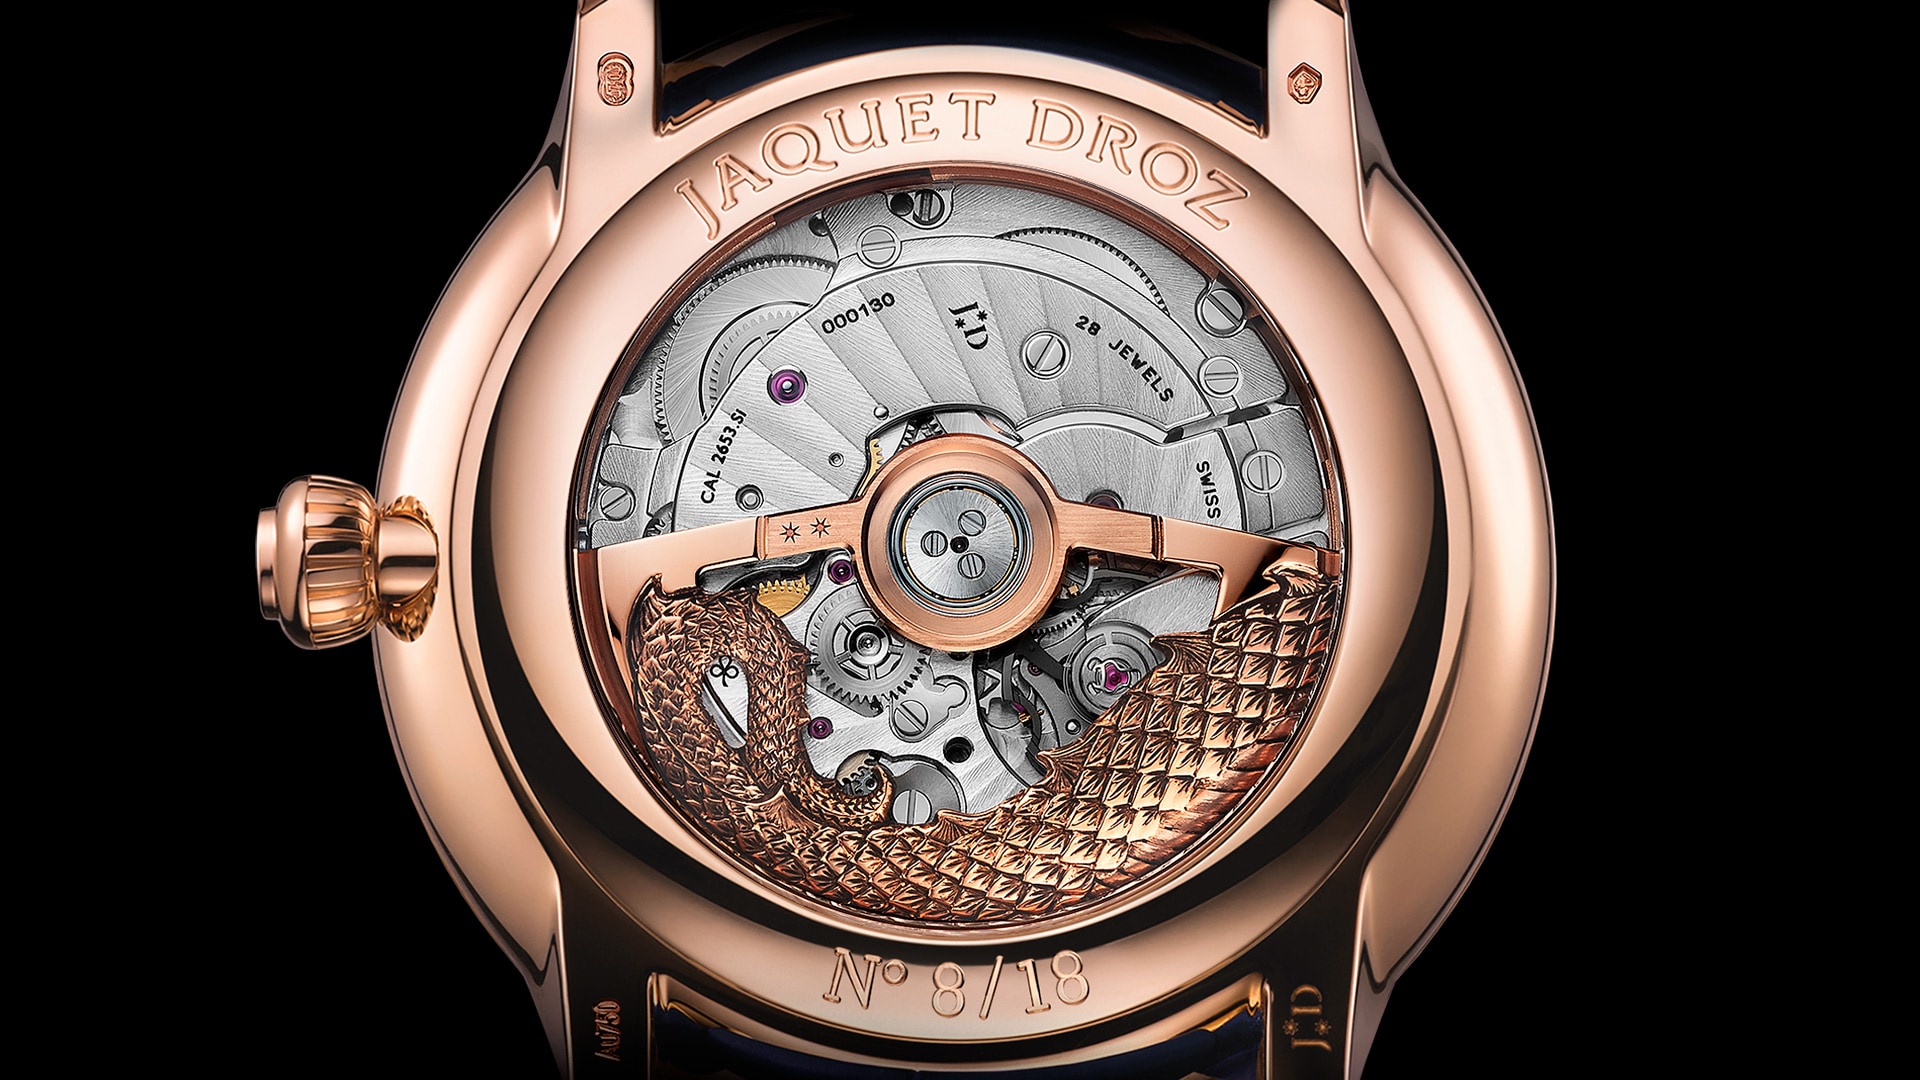 Petite Heure Minute “Dragon”: the first masterpiece created from the collaboration between Jaquet Droz and John Howe